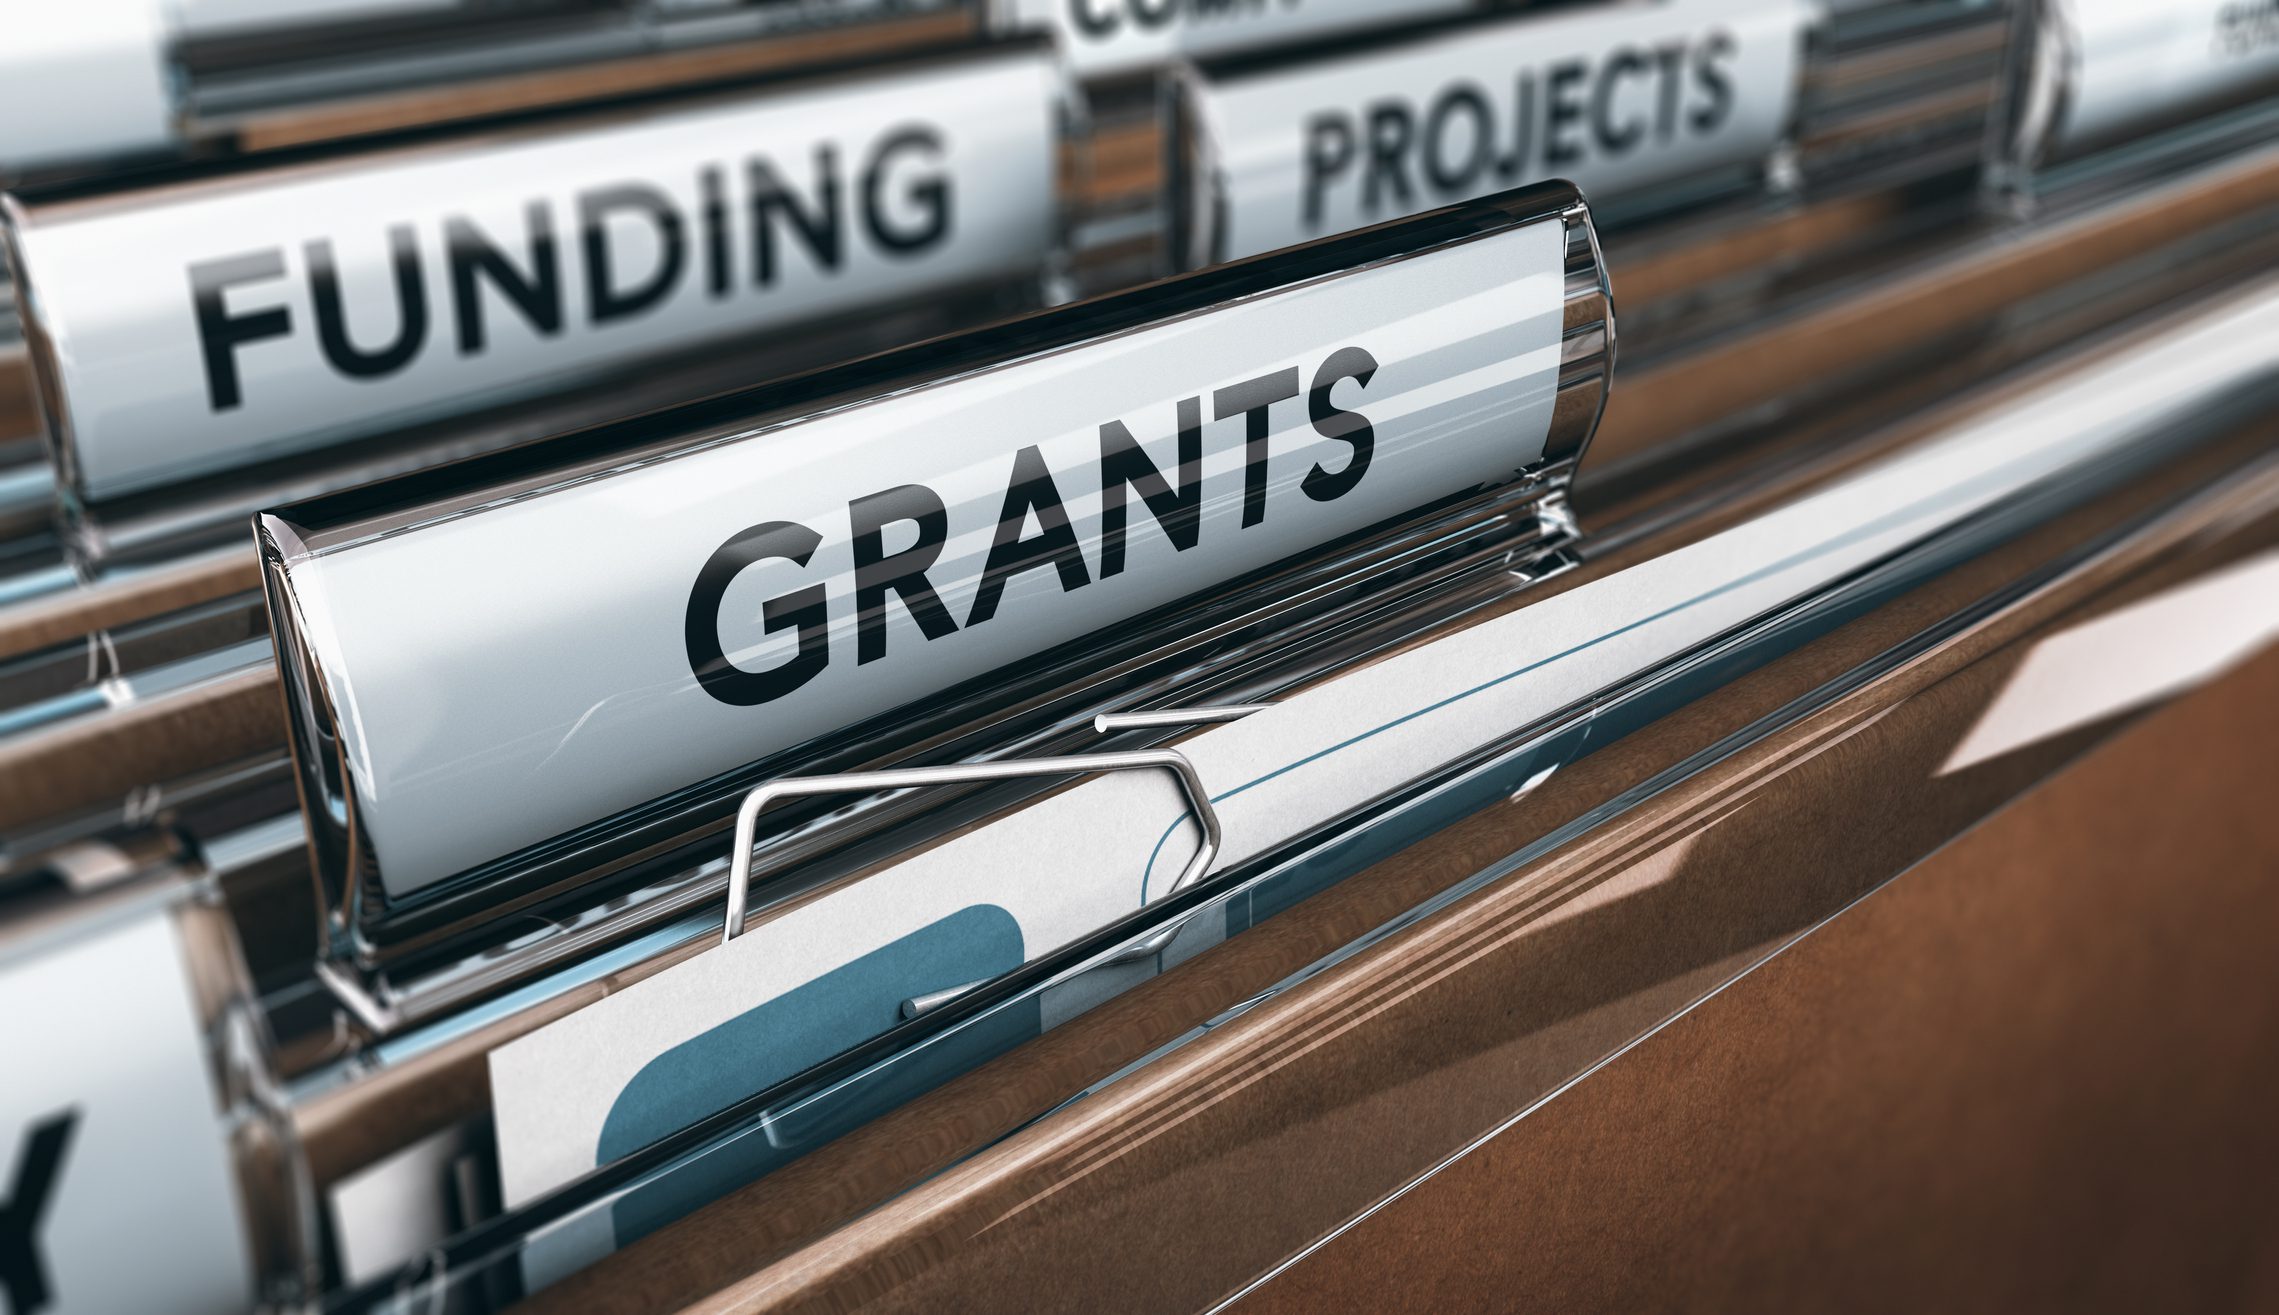 Texas Talent Connection receives grant